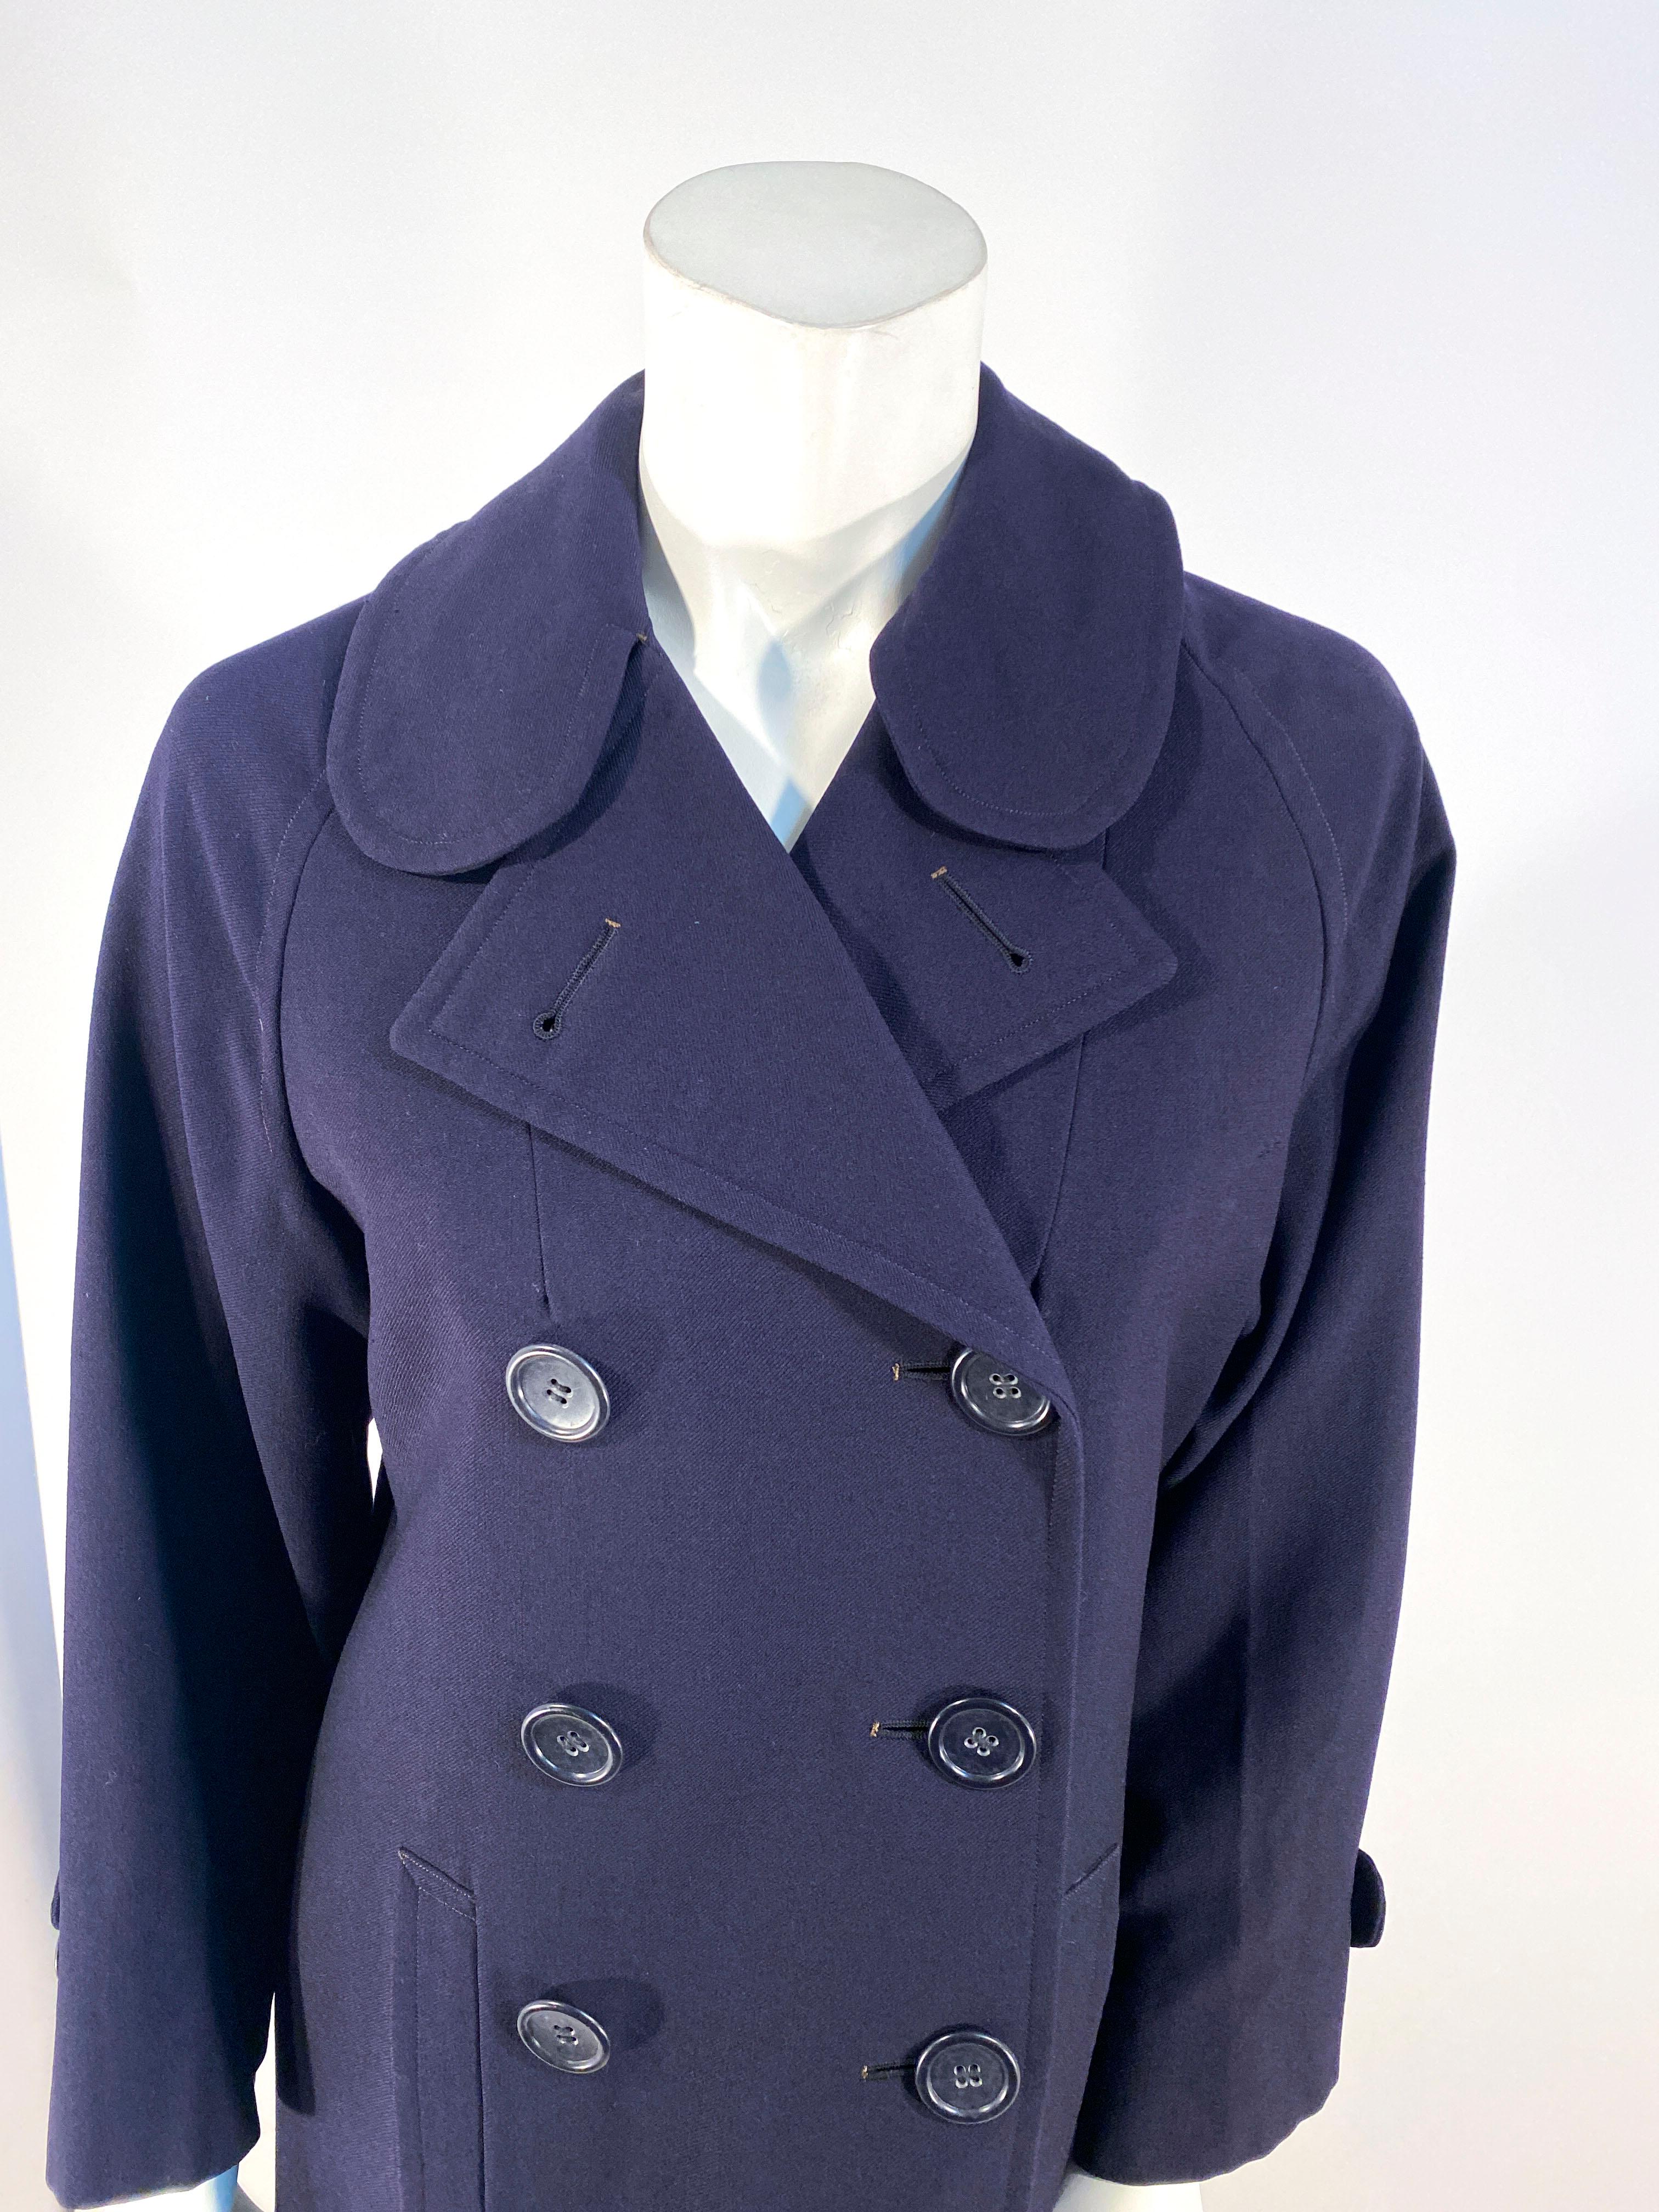 1940s WWII US Navy Woman's double breasted overcoat with two front pockets, adjustable cuffs, and a partial lining in the interior. The interior label states that this coat is a US Woman's Navy Reserve Garment. 
